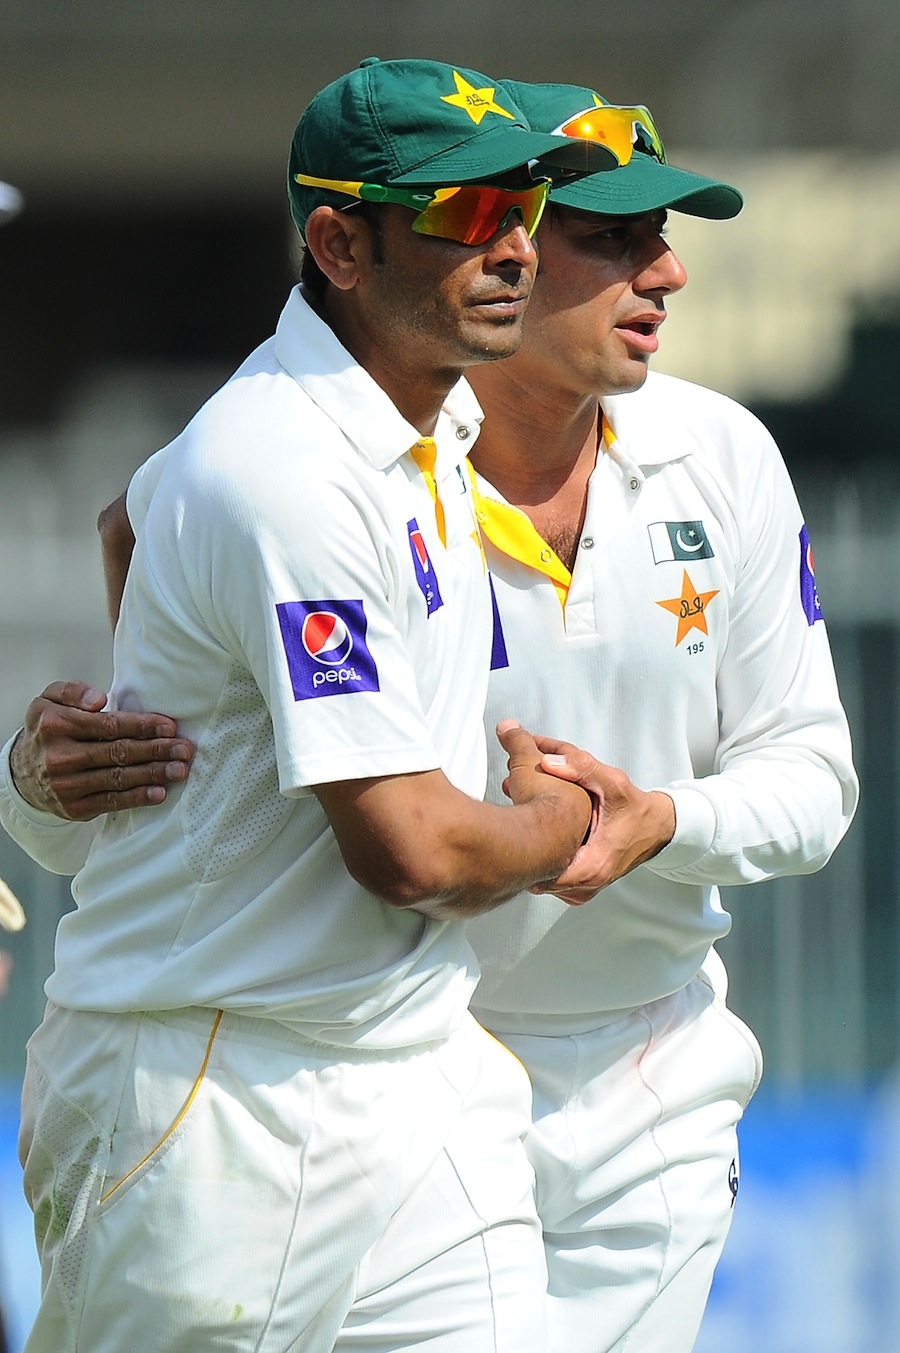 Pakistani bowlers Abdur Rehman (L) and Saeed Ajmal leave the pitch at the end of Sri Lanka's second innings during the final day of the third and final cricket Test match between Pakistan and Sri Lanka at the Sharjah International Cricket Stadium in the